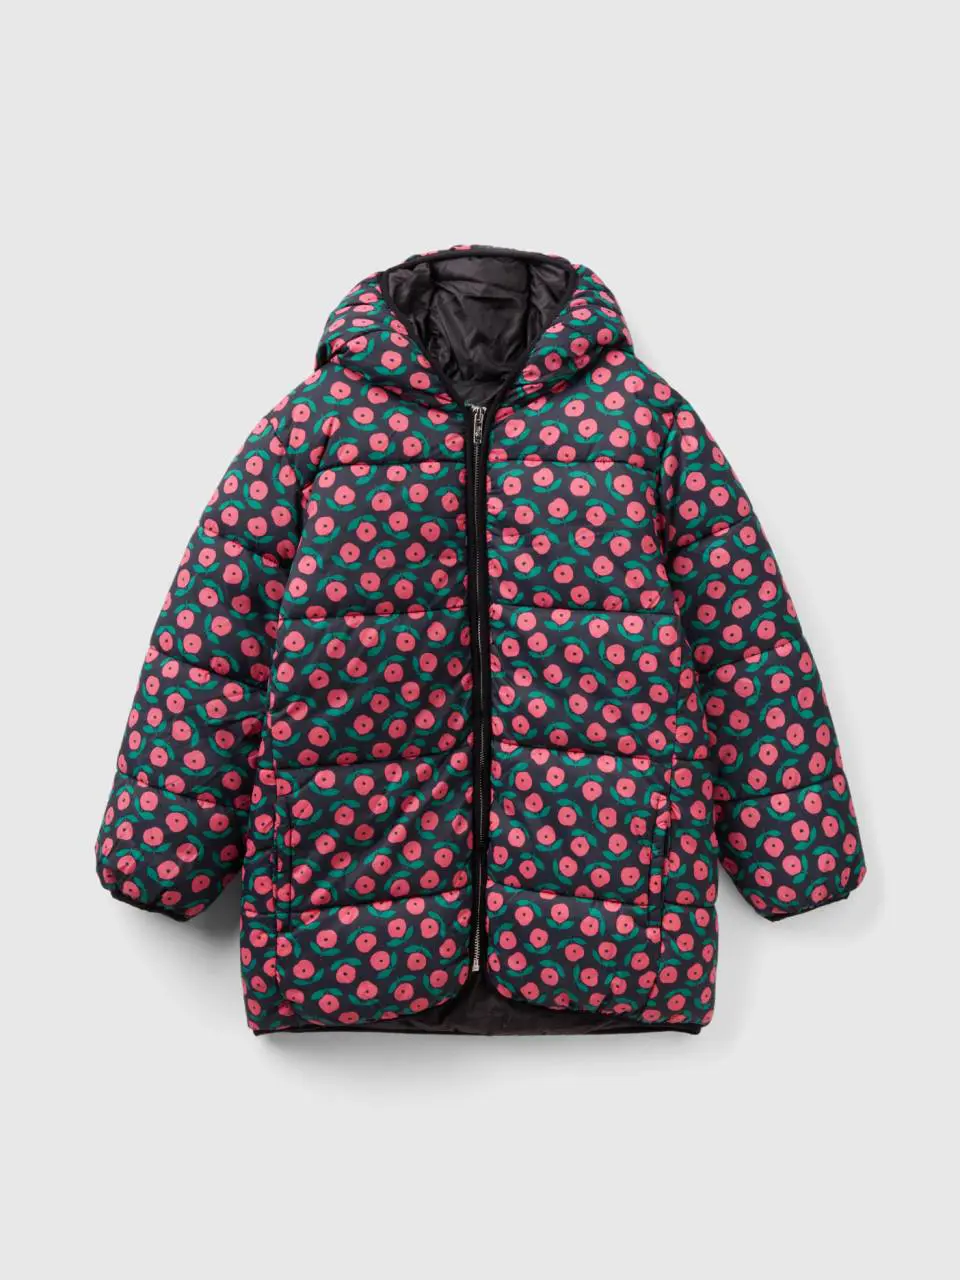 Benetton oversized fit jacket with floral print. 1